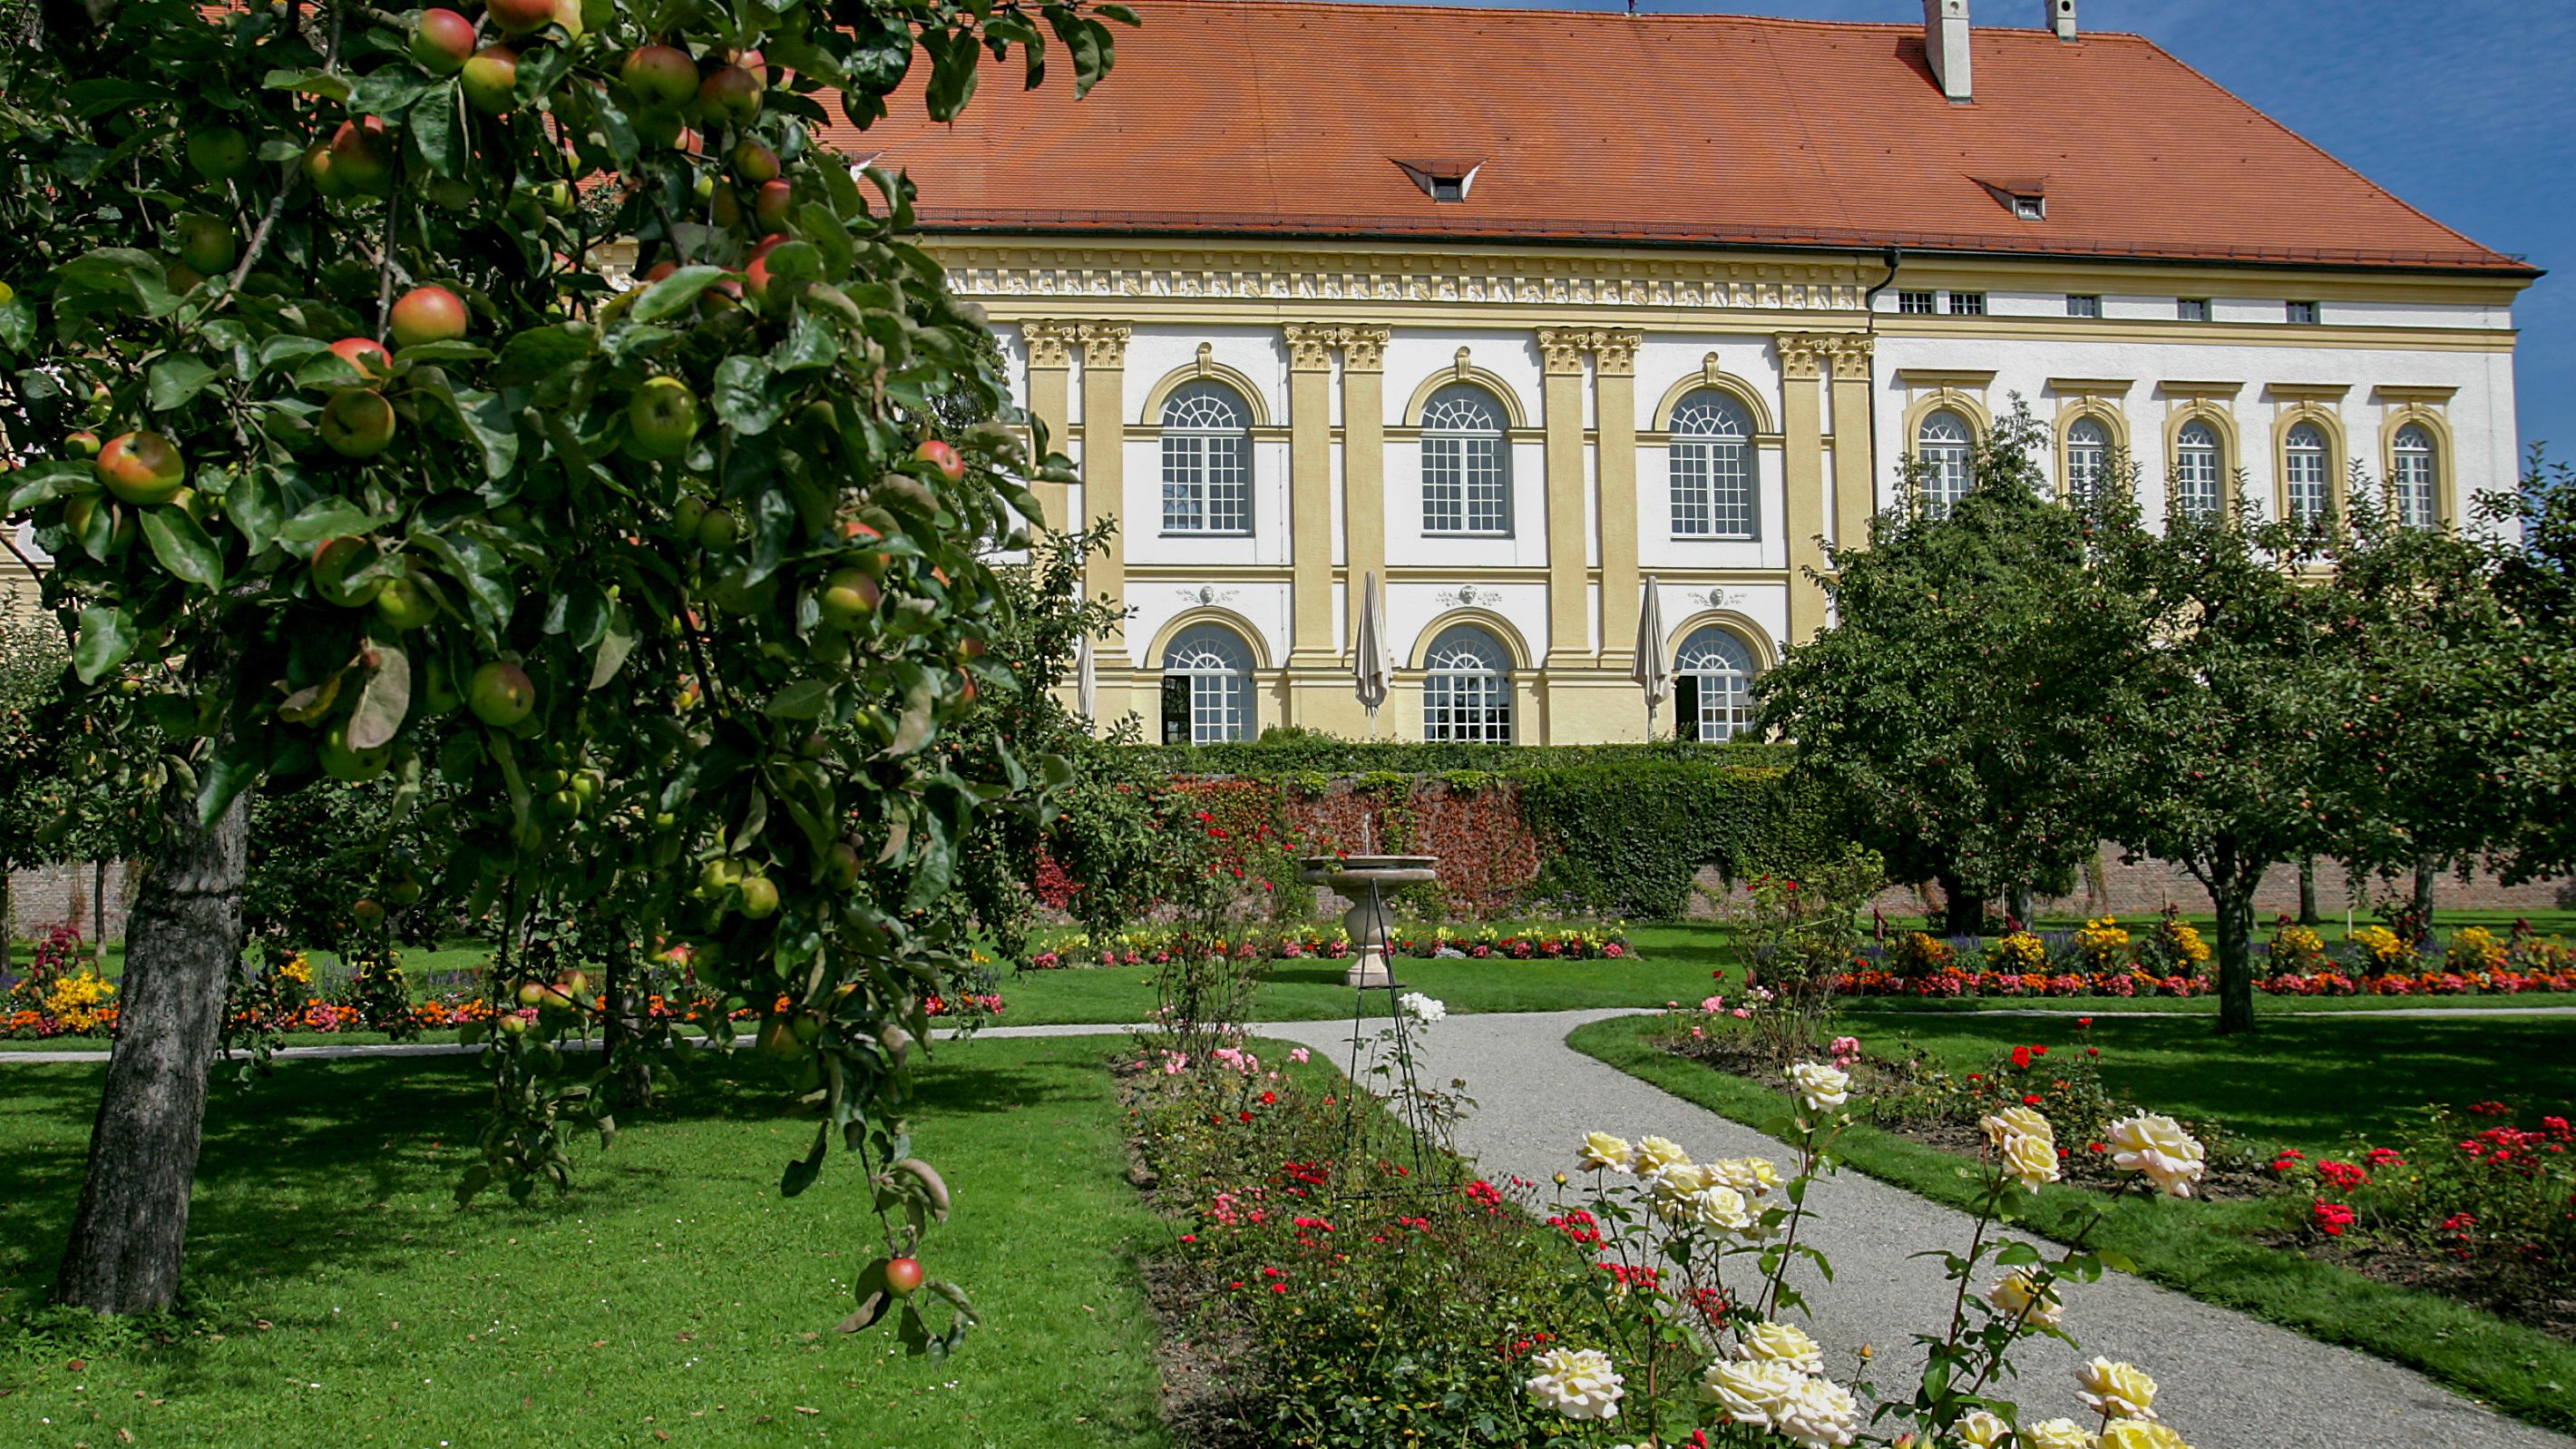 Photo of Dachau Palace garden in the fall, apples ripening in the trees. Phto: City of Dachau